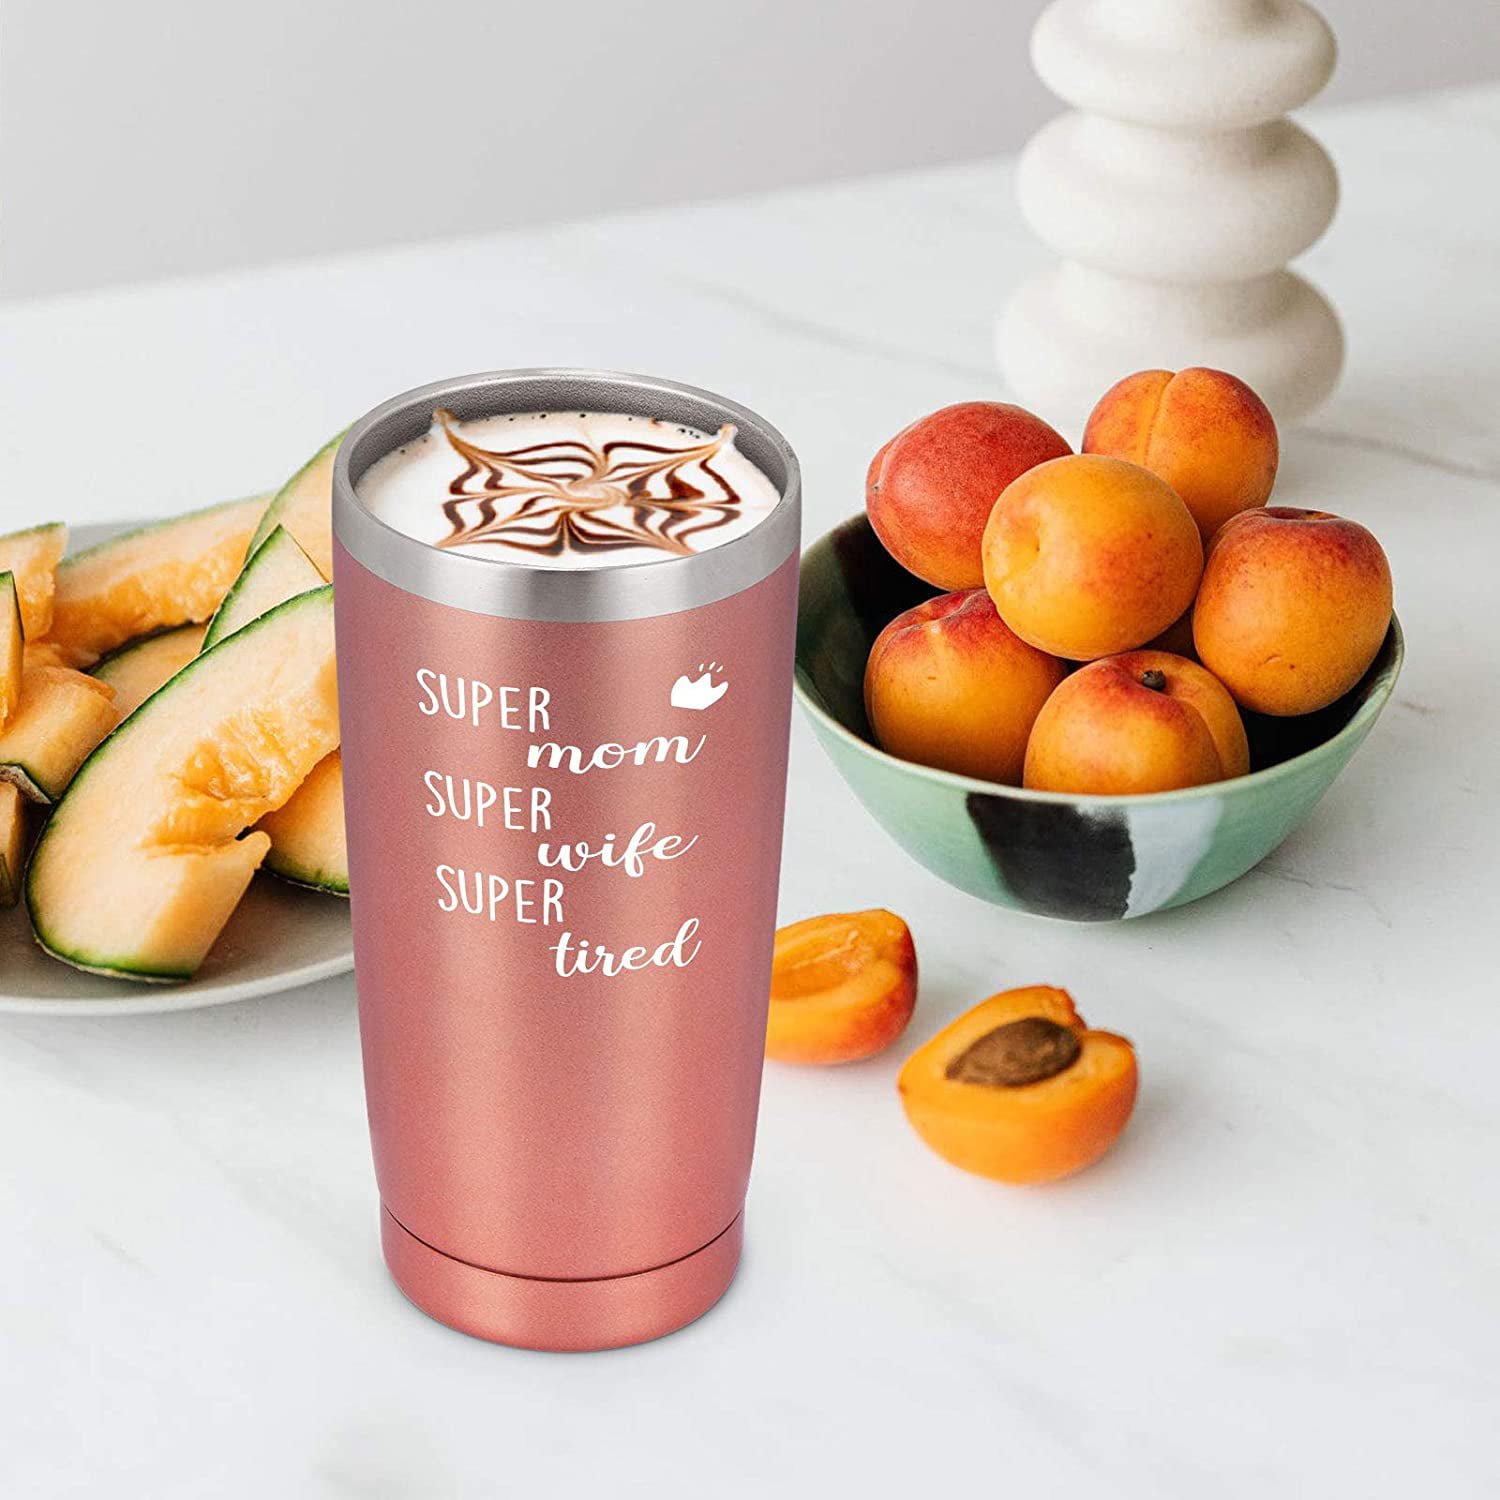 Super Mom Super Wife Super Tired Funny Stainless Steel Insulated Travel Tumbler for Mom Mama with 2 Lids and Straws 20 Oz, Mint Gingprous Mother's Day Birthday Gift for Mom Mother Mommy